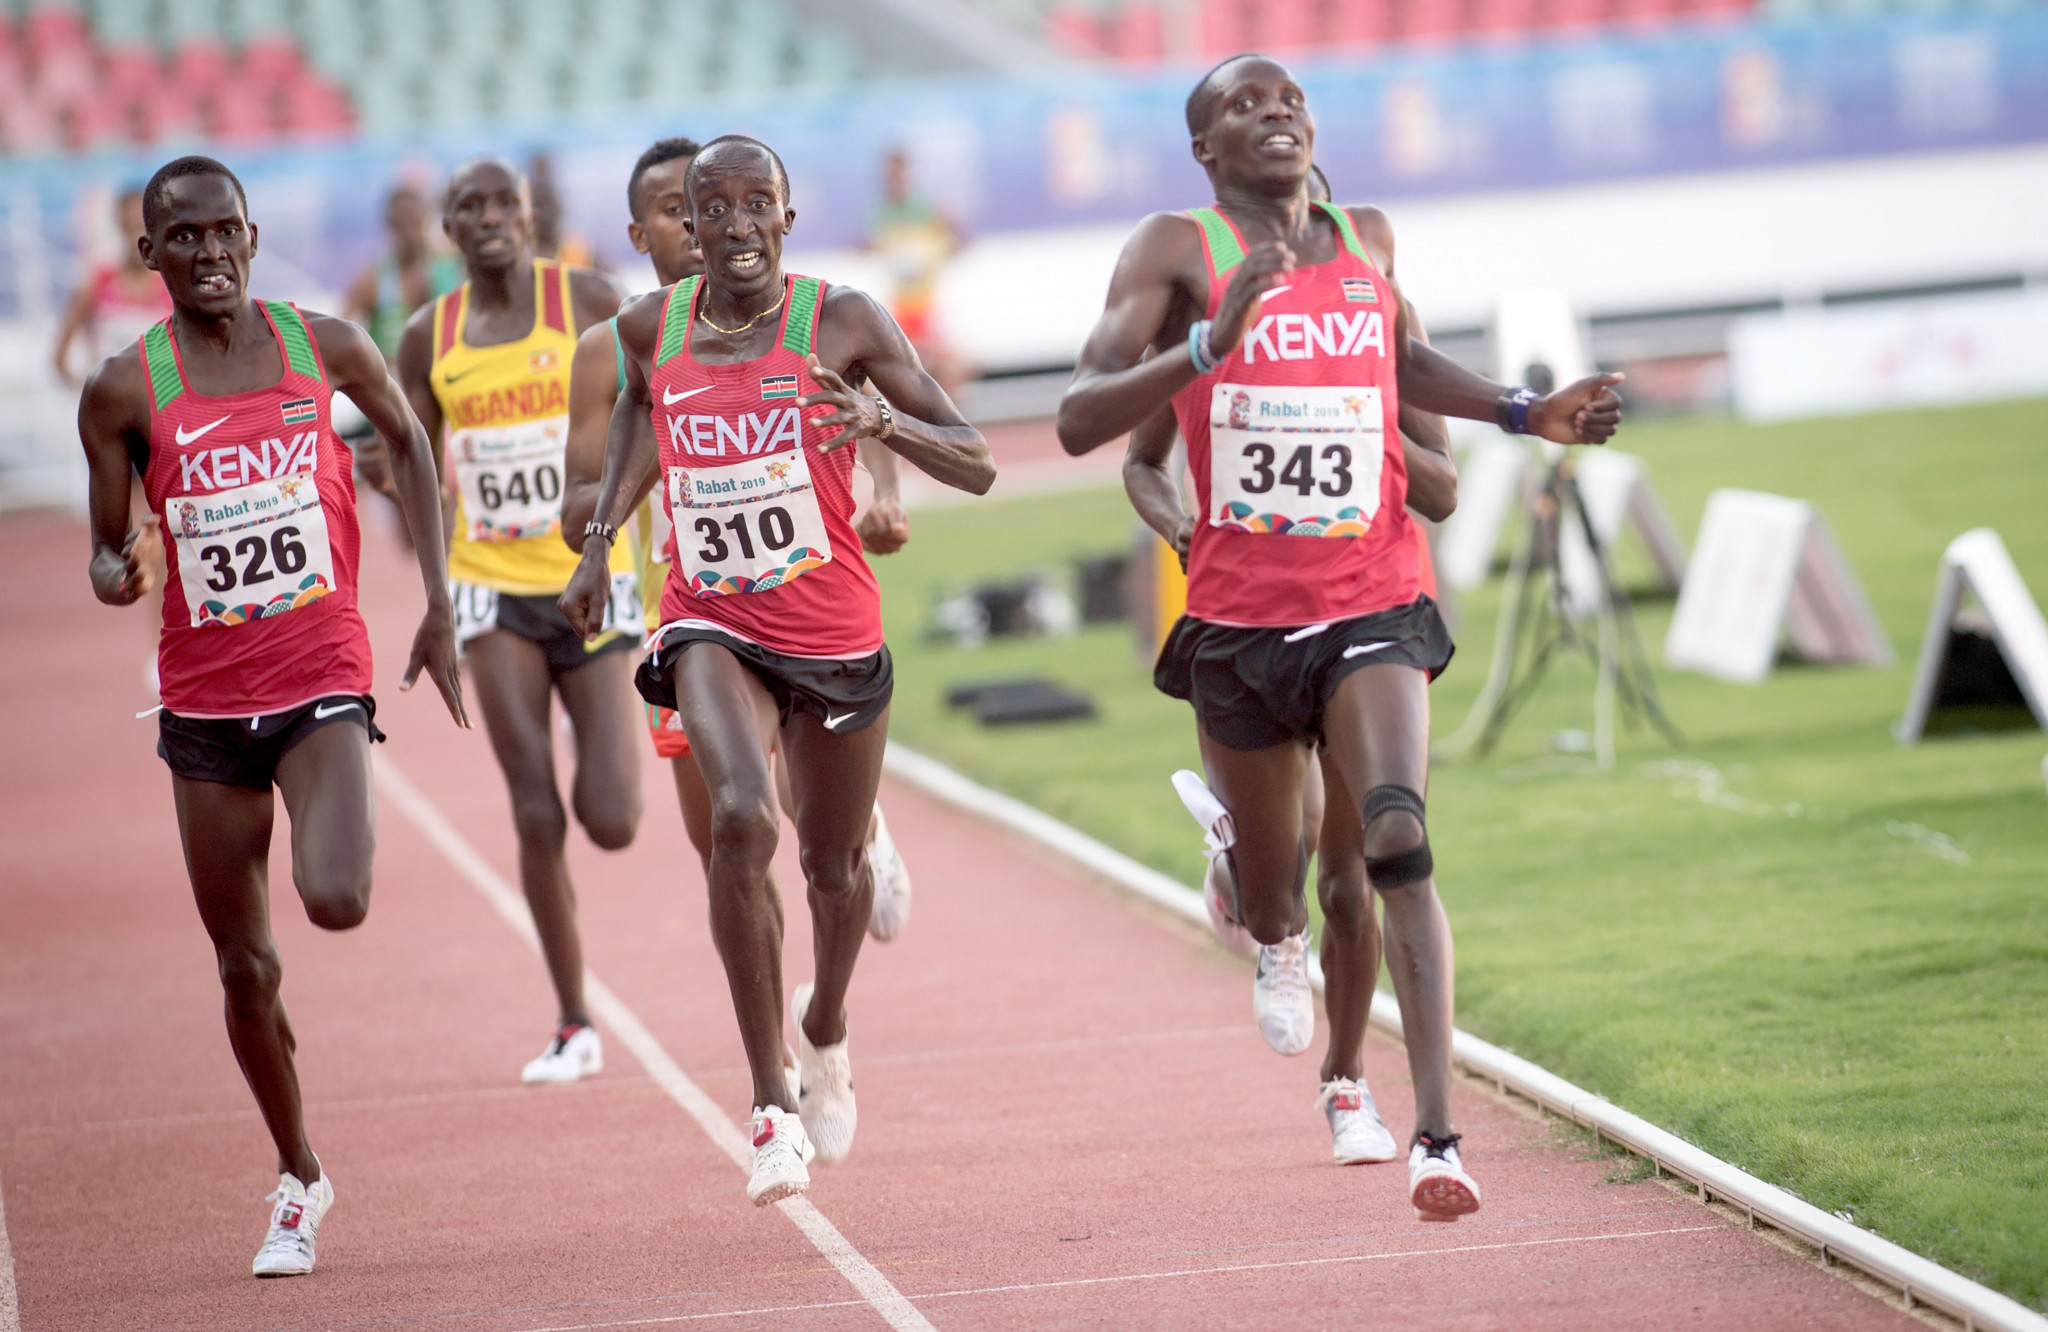 The 2019 African Games were held in Rabat in Morocco ©Getty Images